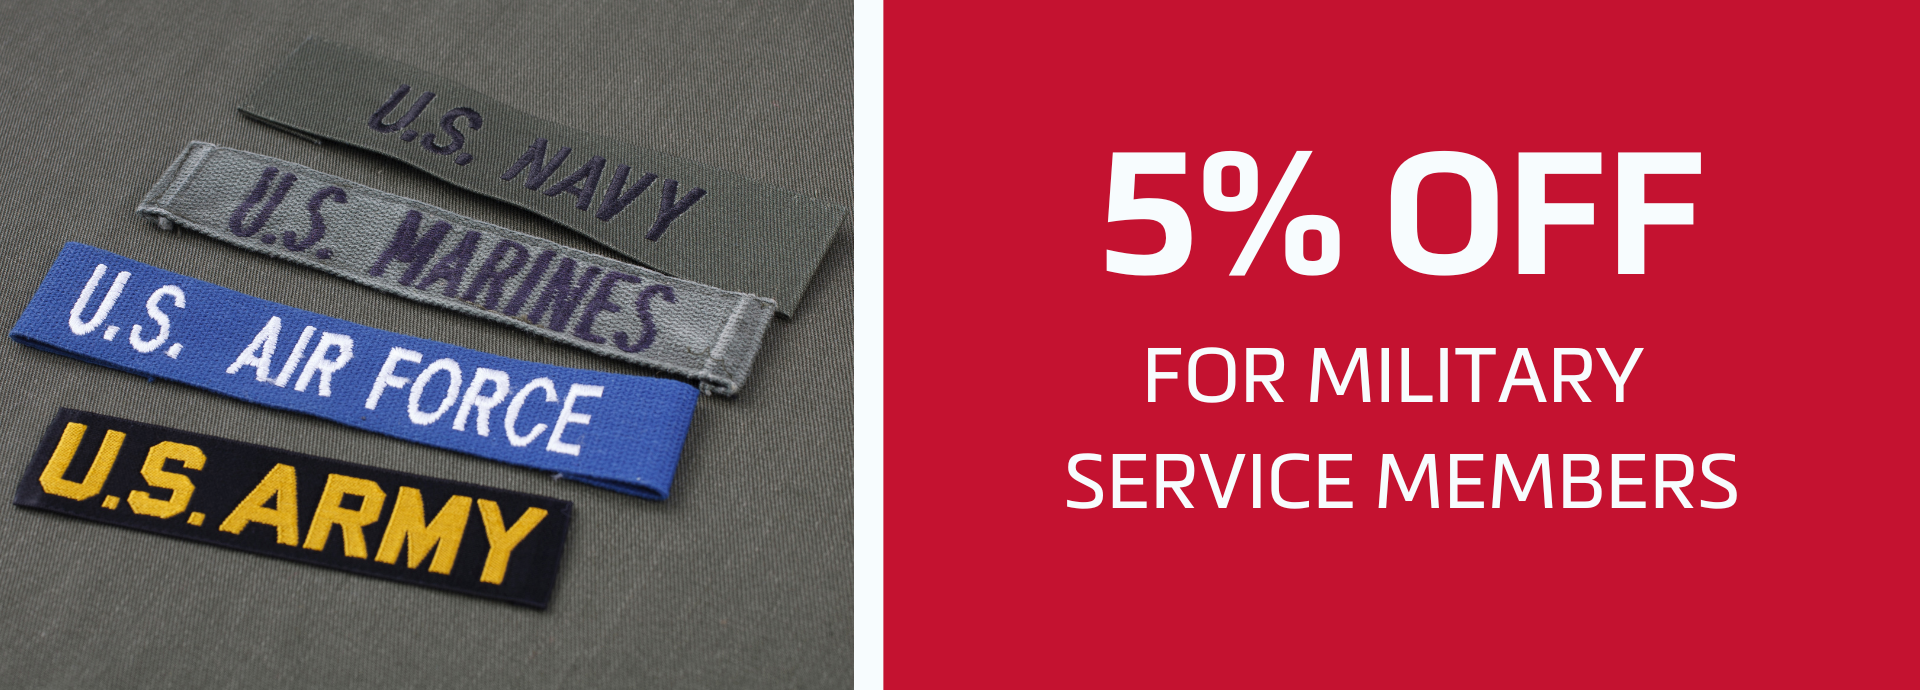 Military Service Discount